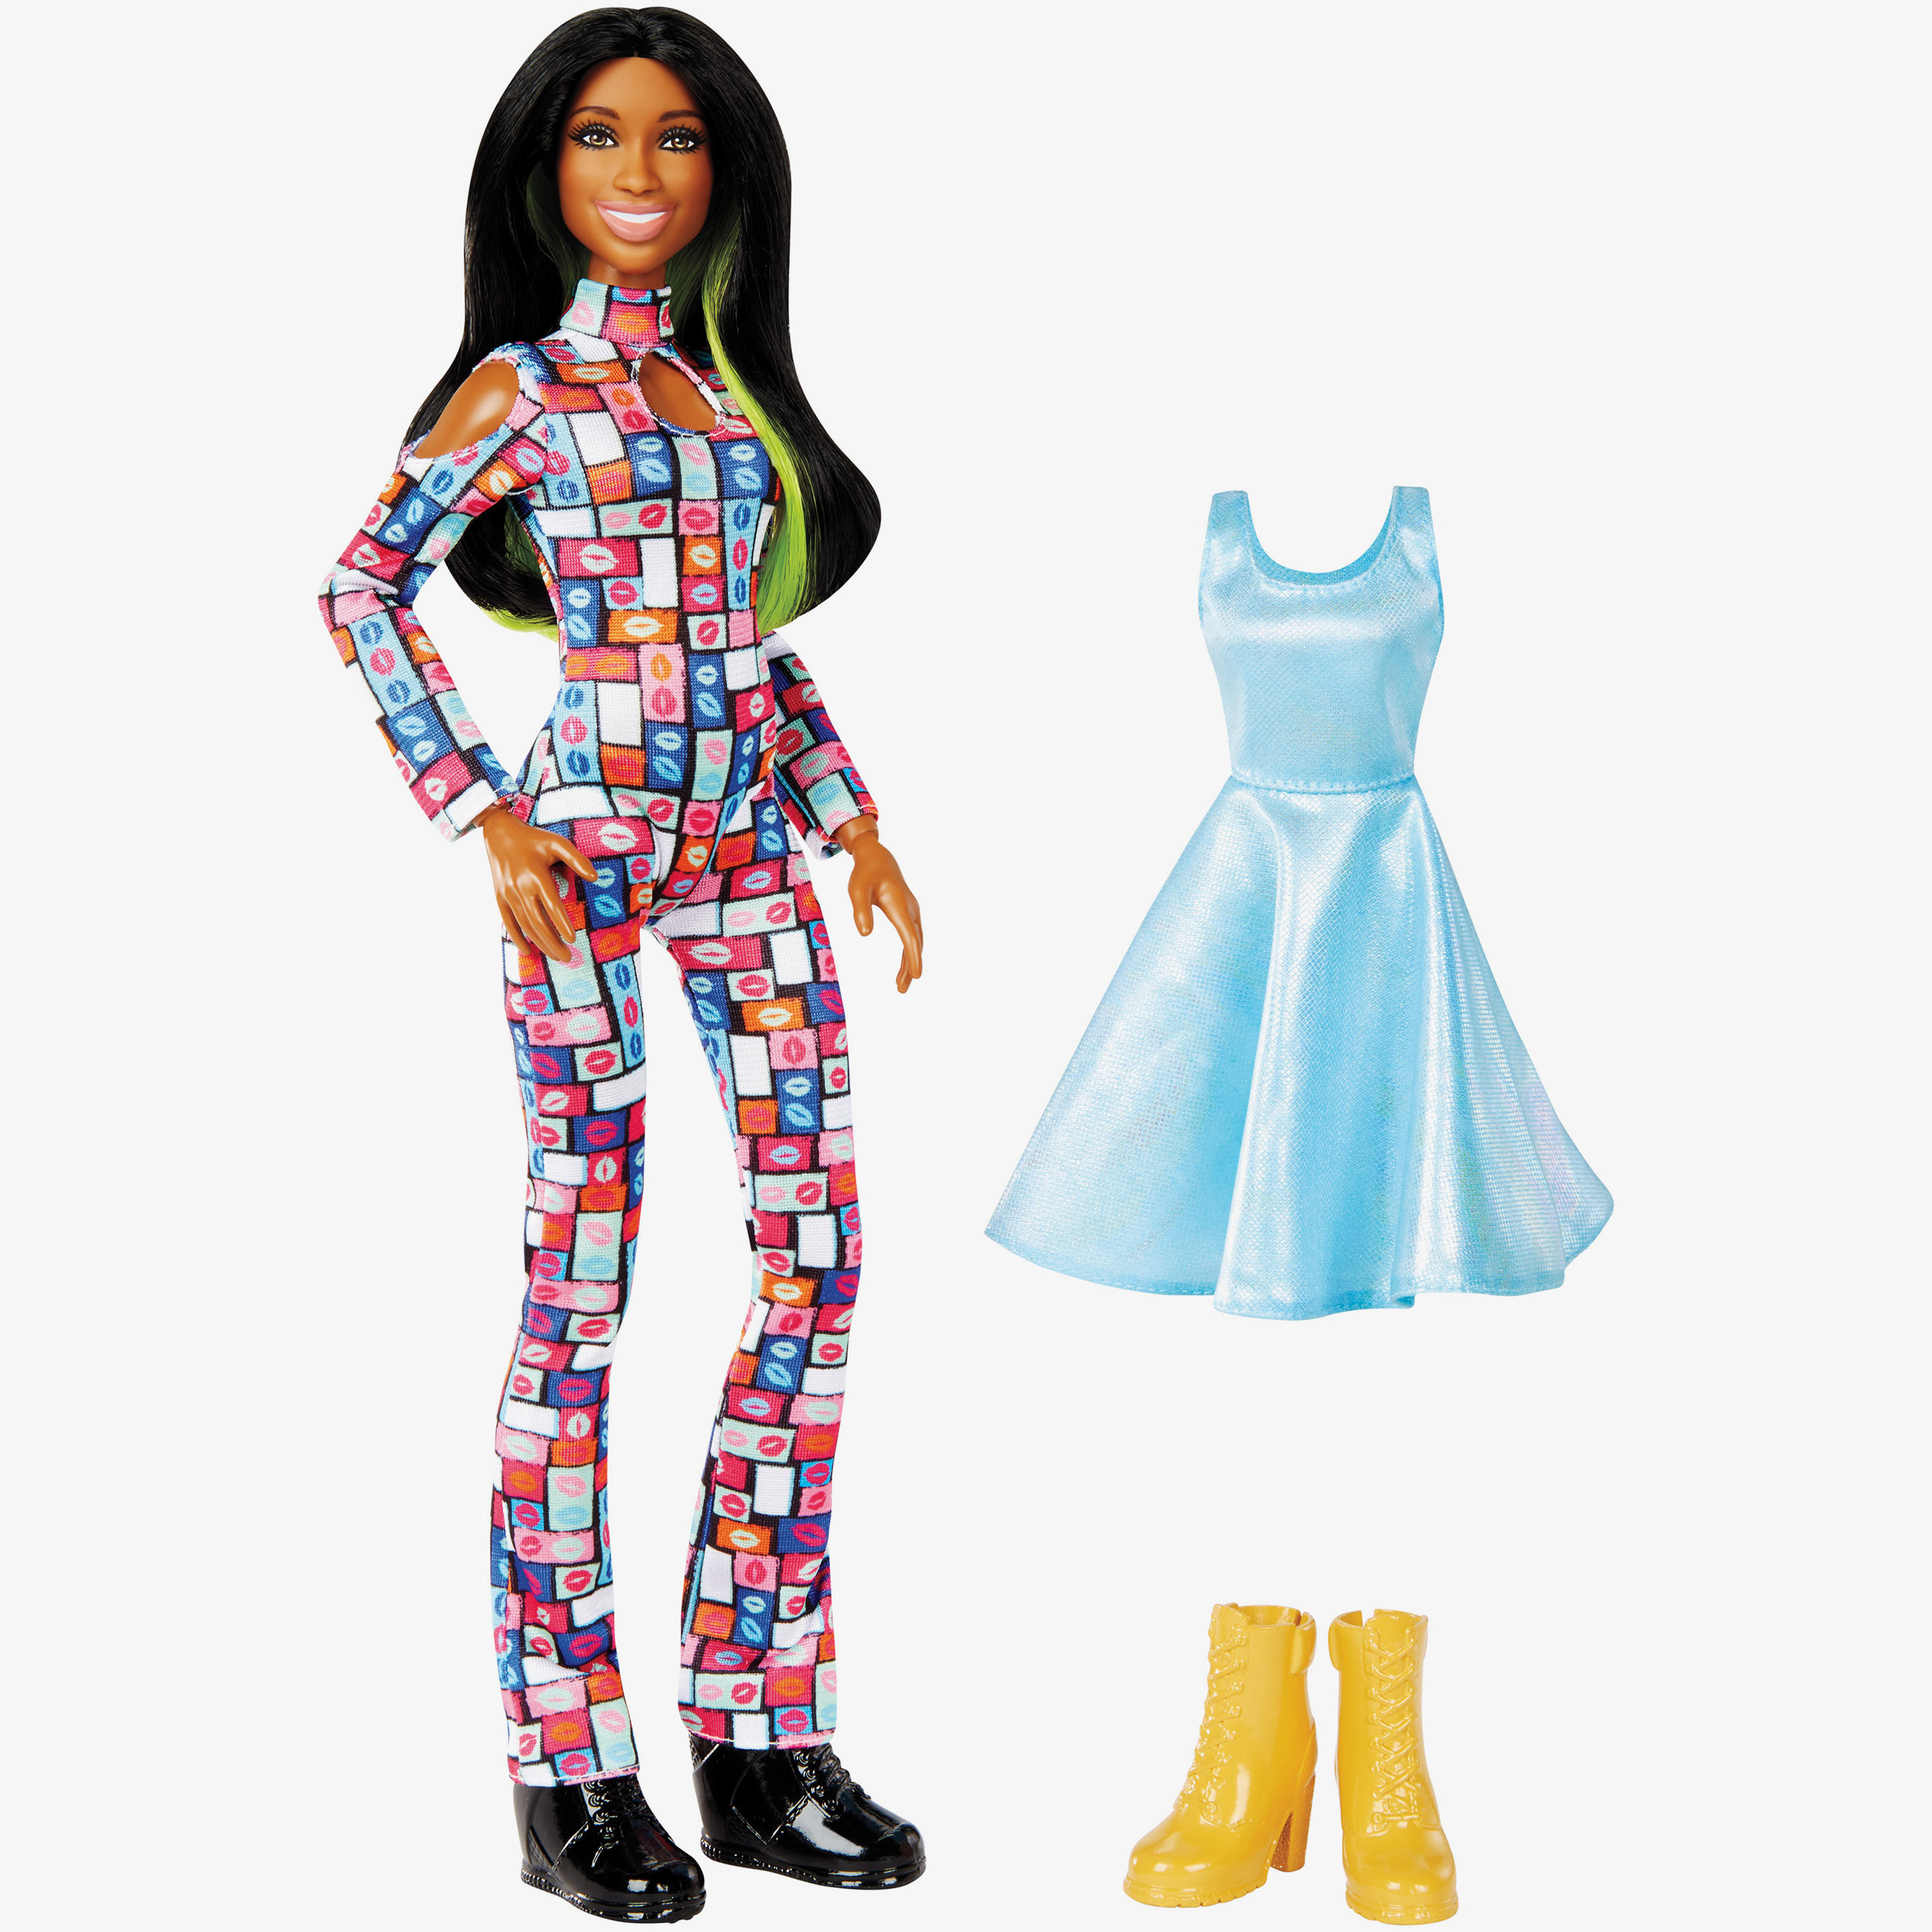 Naomi - 12 inch WWE Fashion Doll (With Exra Accessories)